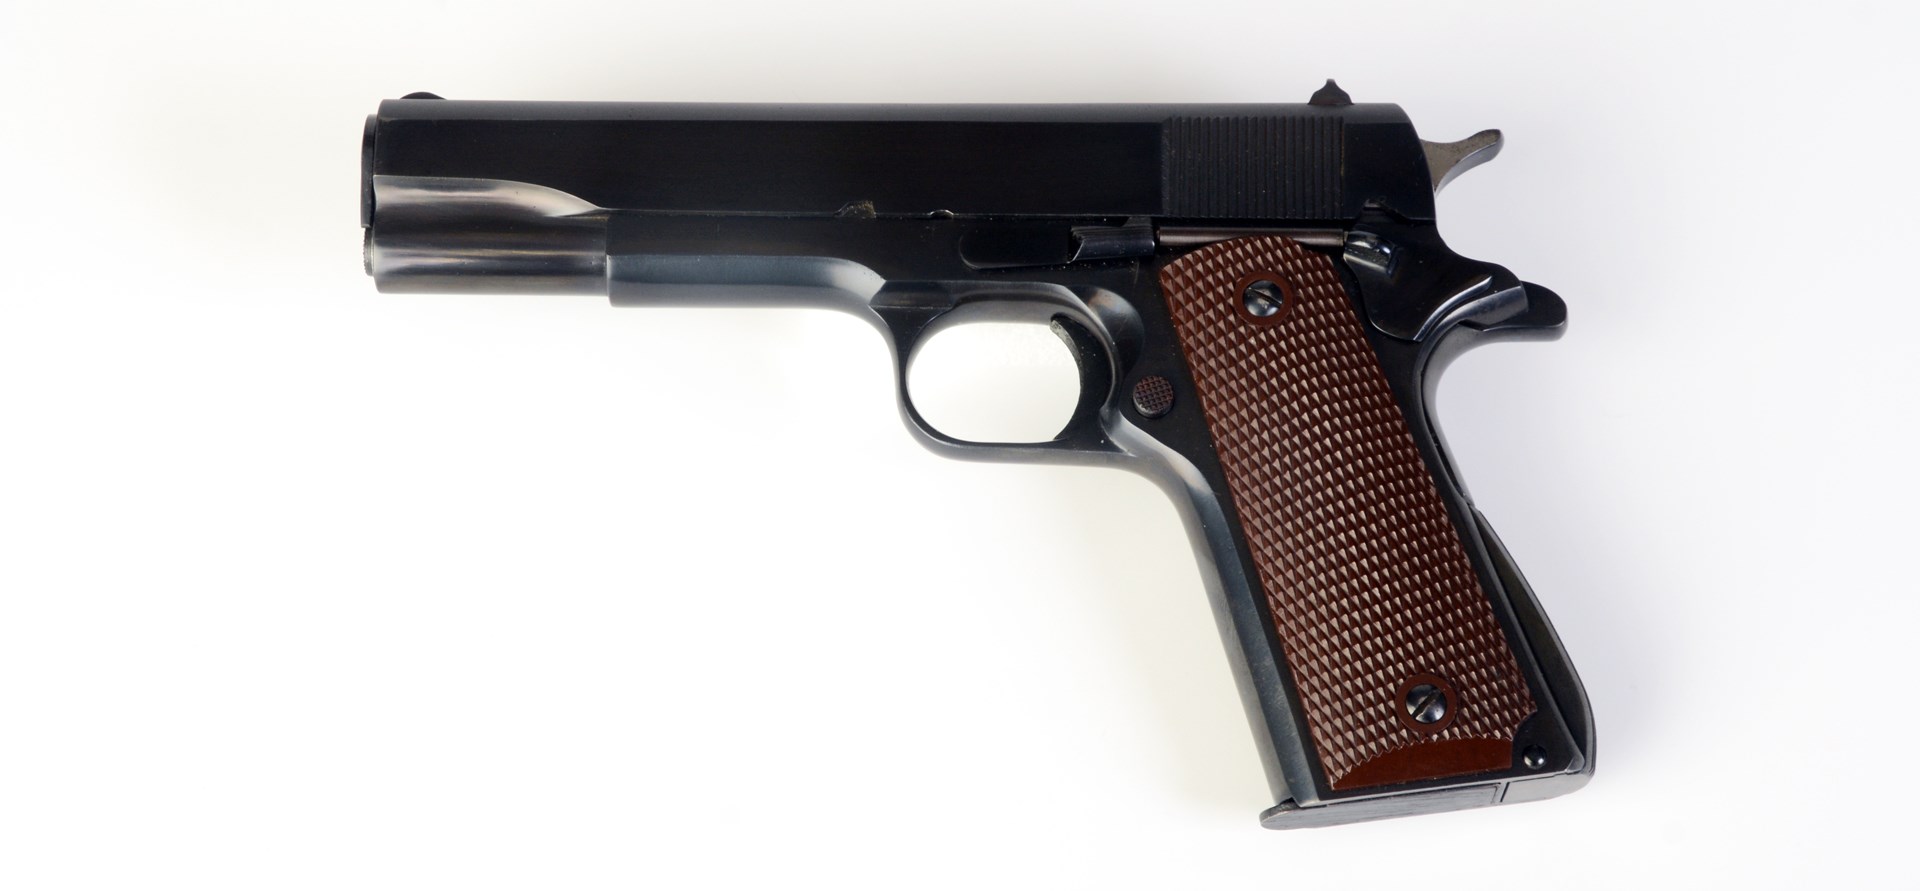 left-side view of rare colt m1911 pistol chambered for .38 Super for clandestine work military